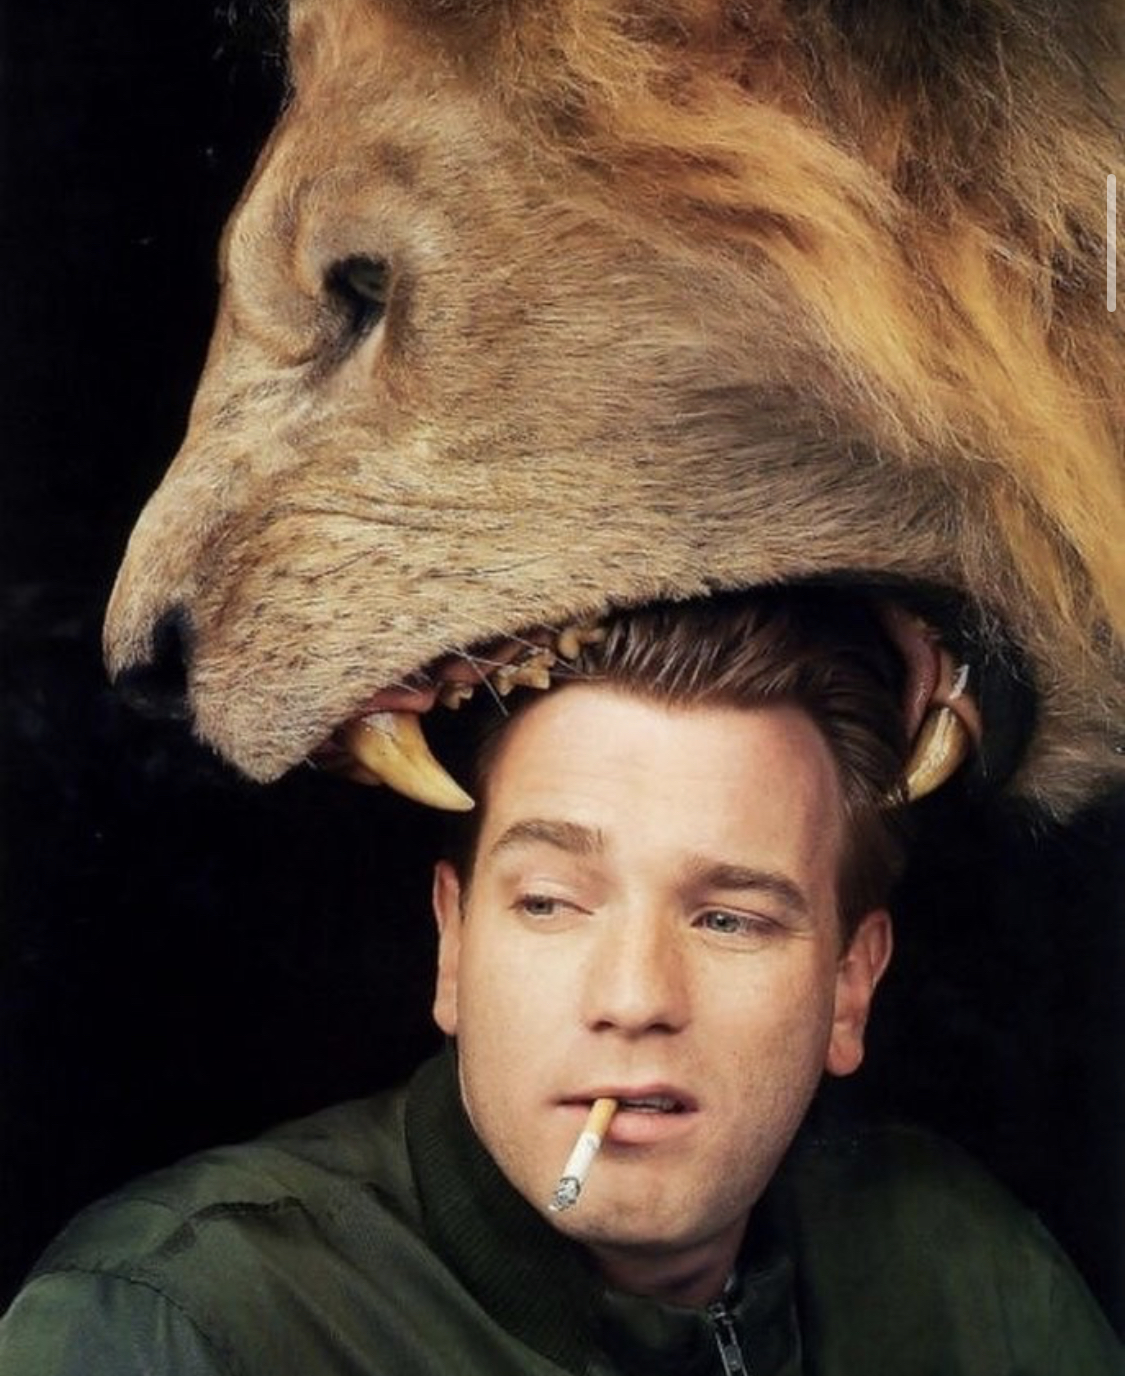 The lion head is fake, the talent is real.
Happy birthday to Ewan McGregor! 